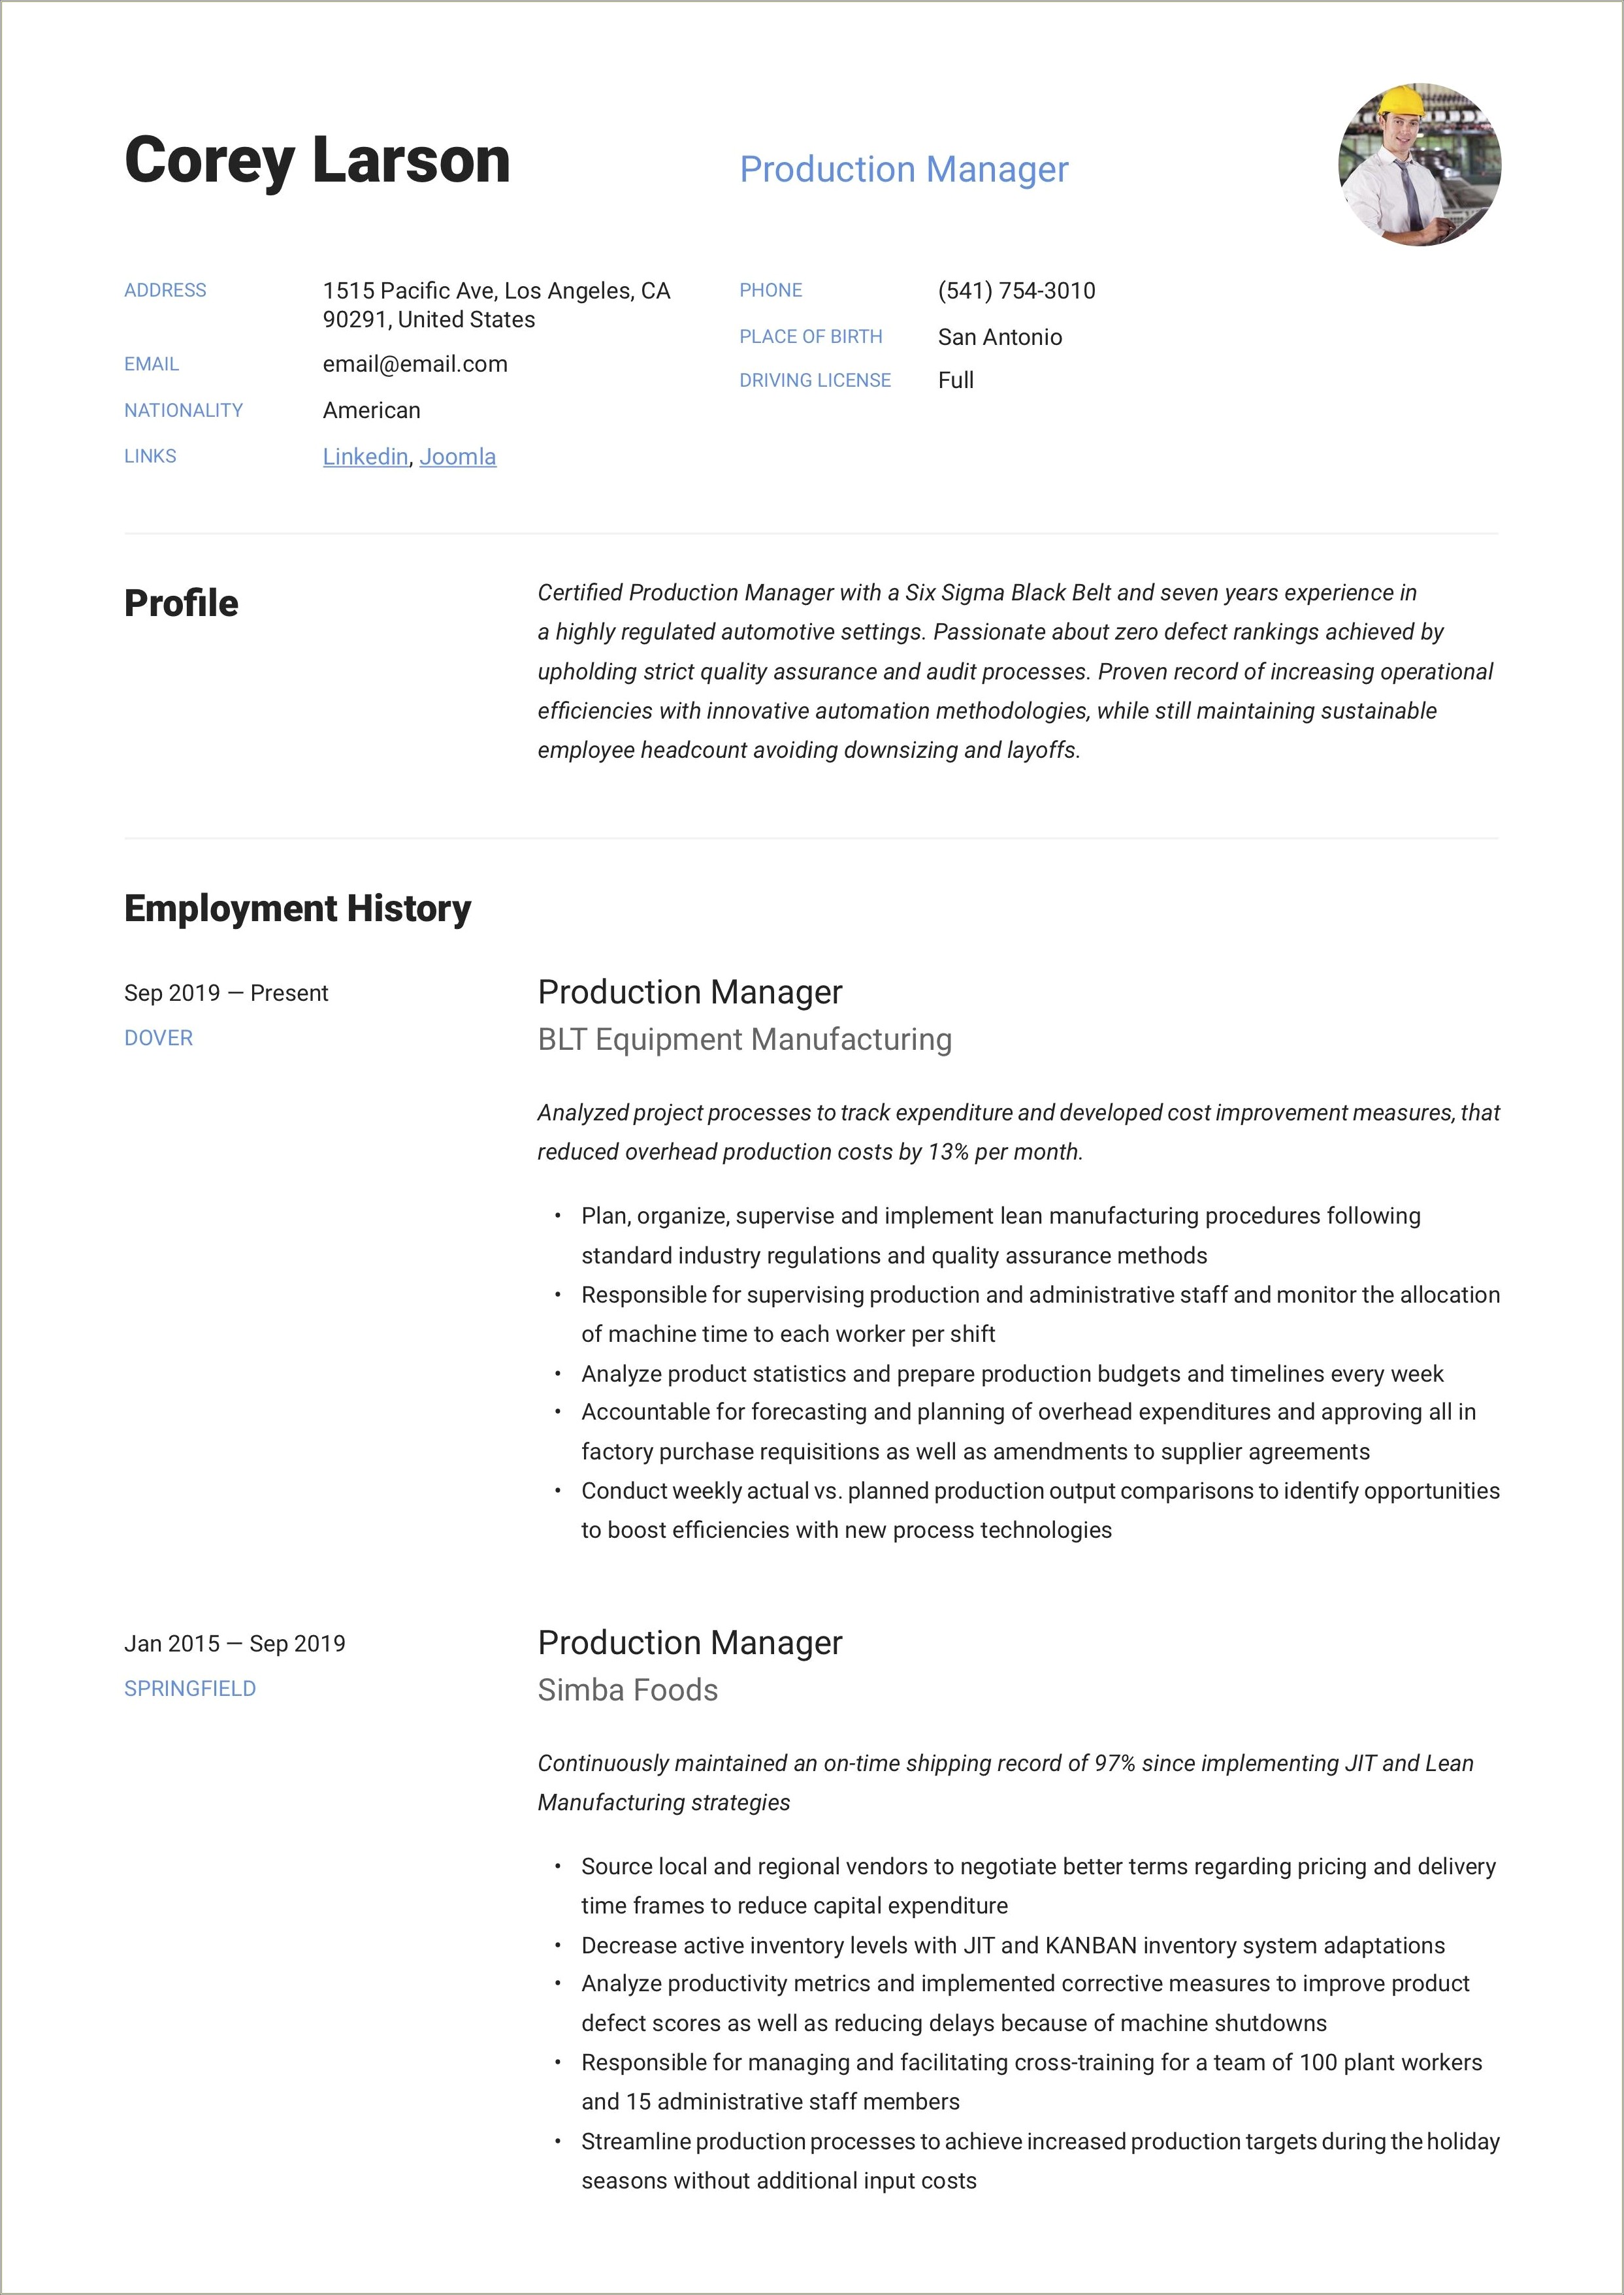 Resume Objective Examples Production Manager